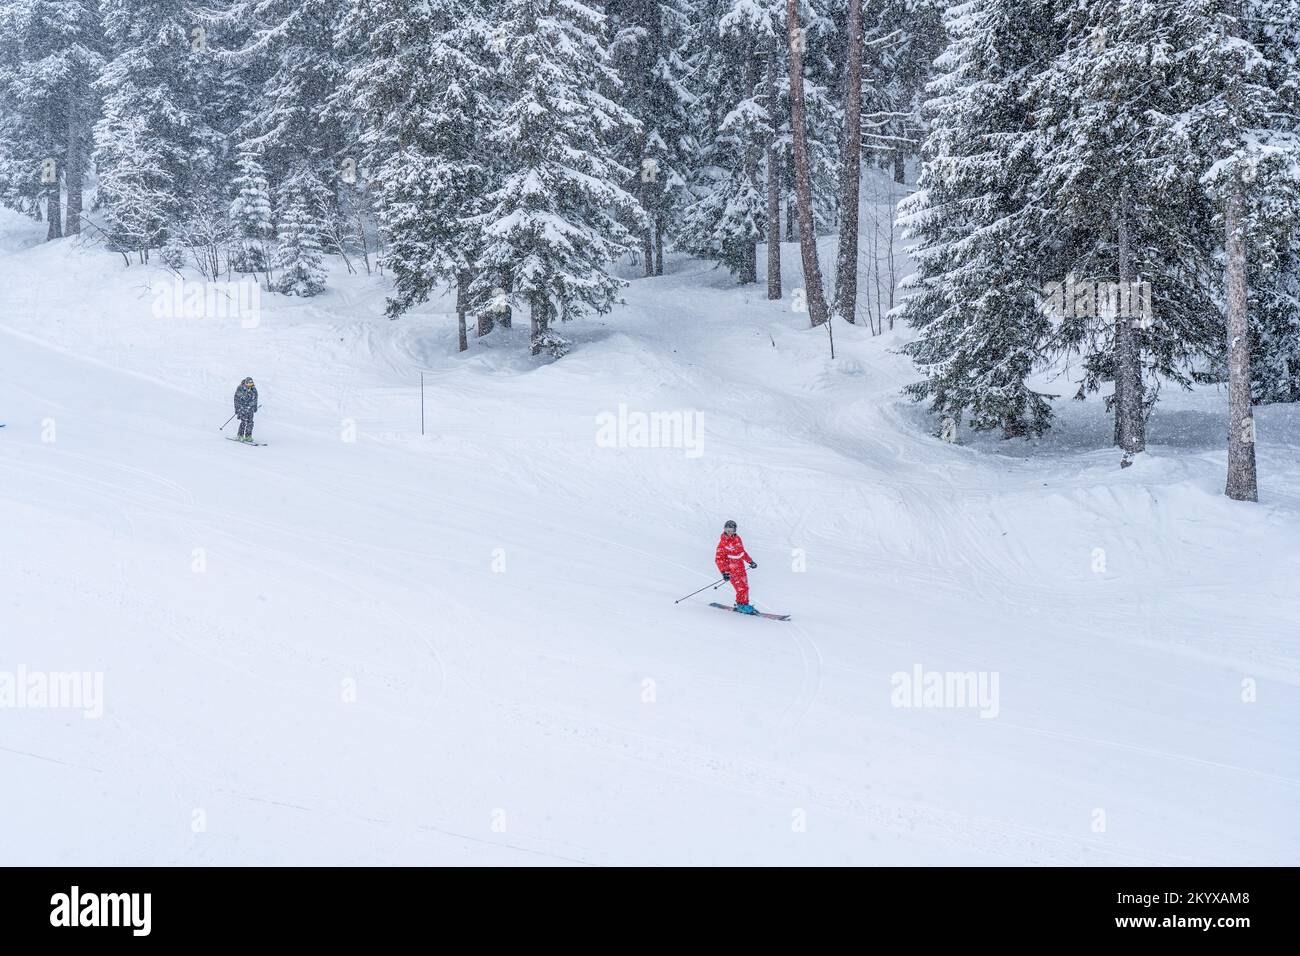 Ski instructor and skier in the french ski resort on mountain, skiing in heavy snow. Hight quality photoi Stock Photo